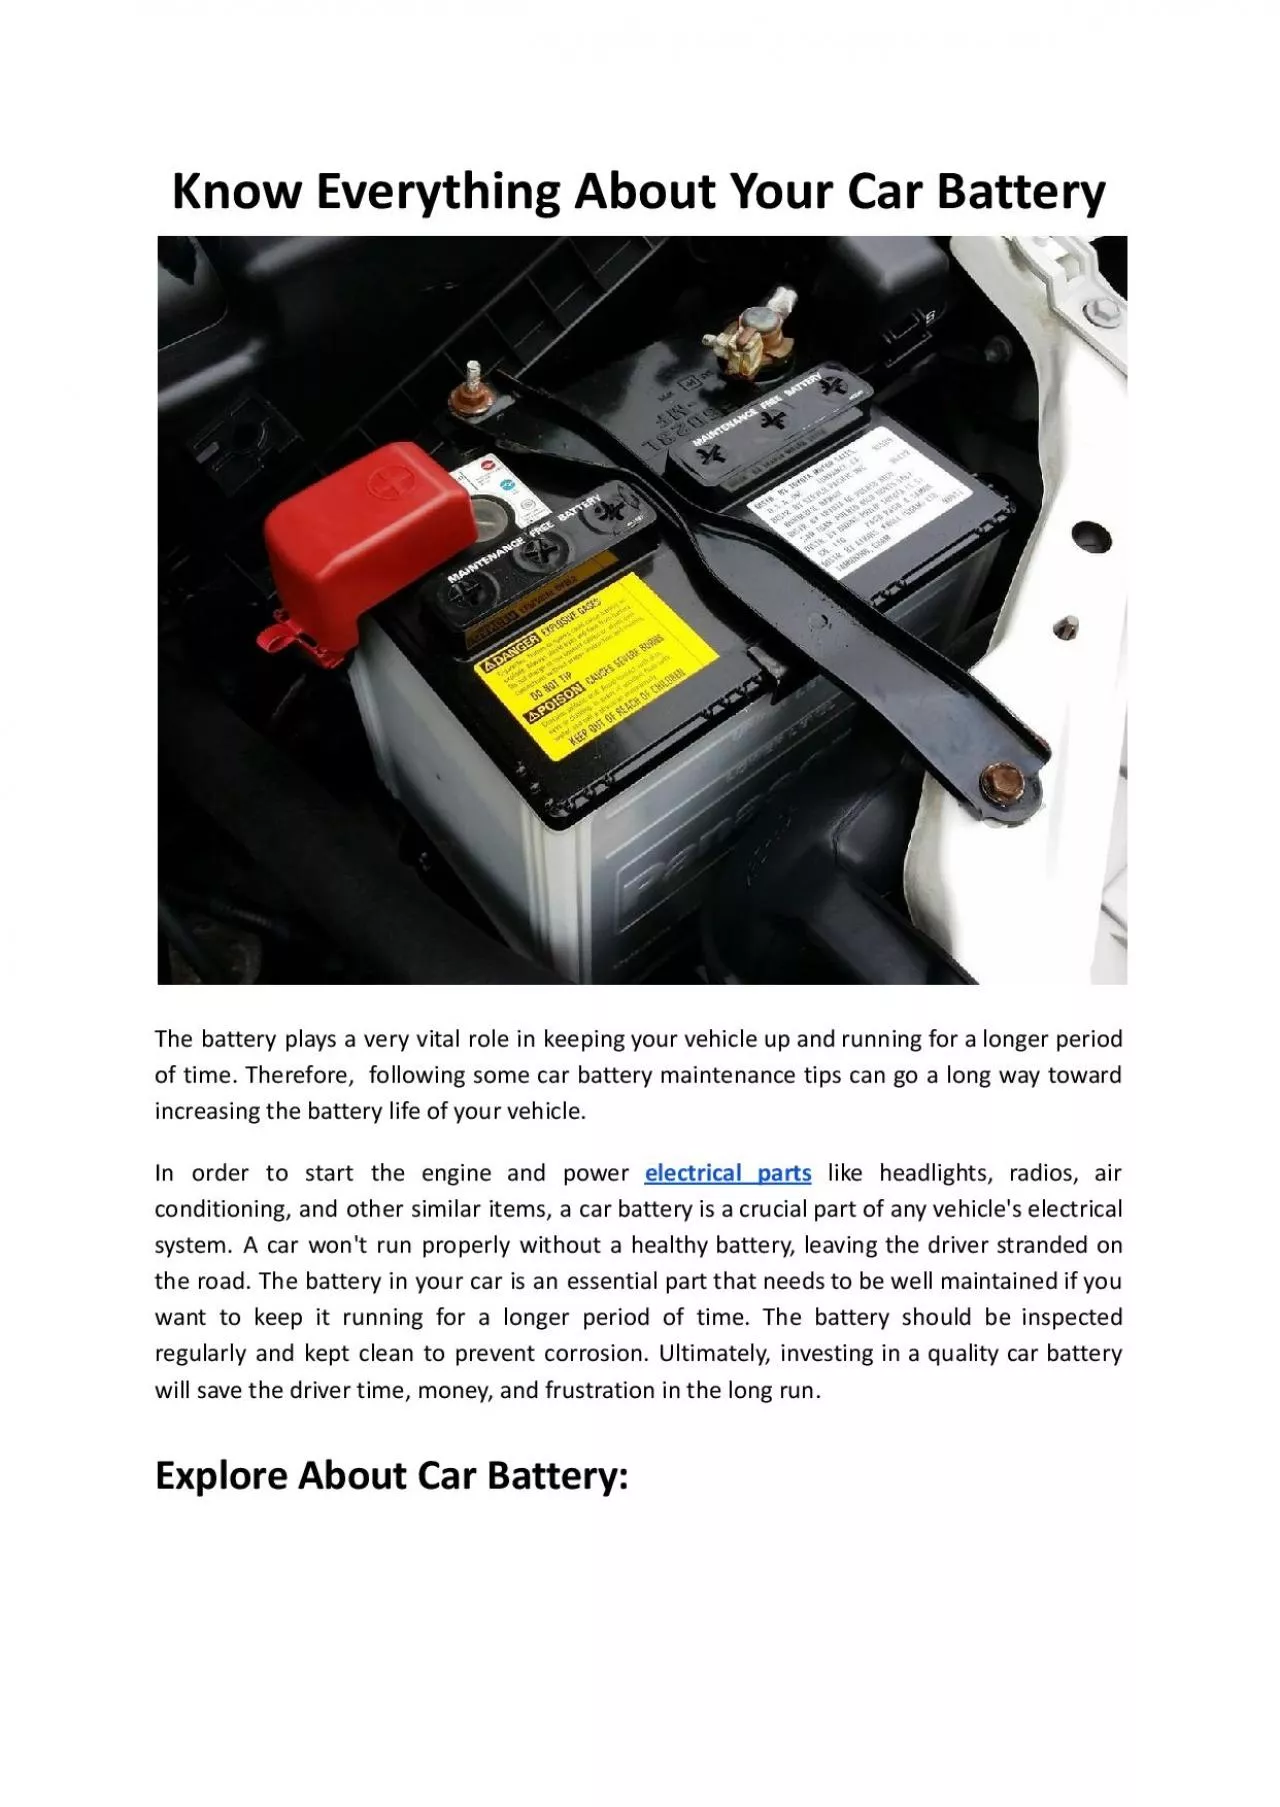 Know Everything About Your Car Battery - Leicester Motor Spares